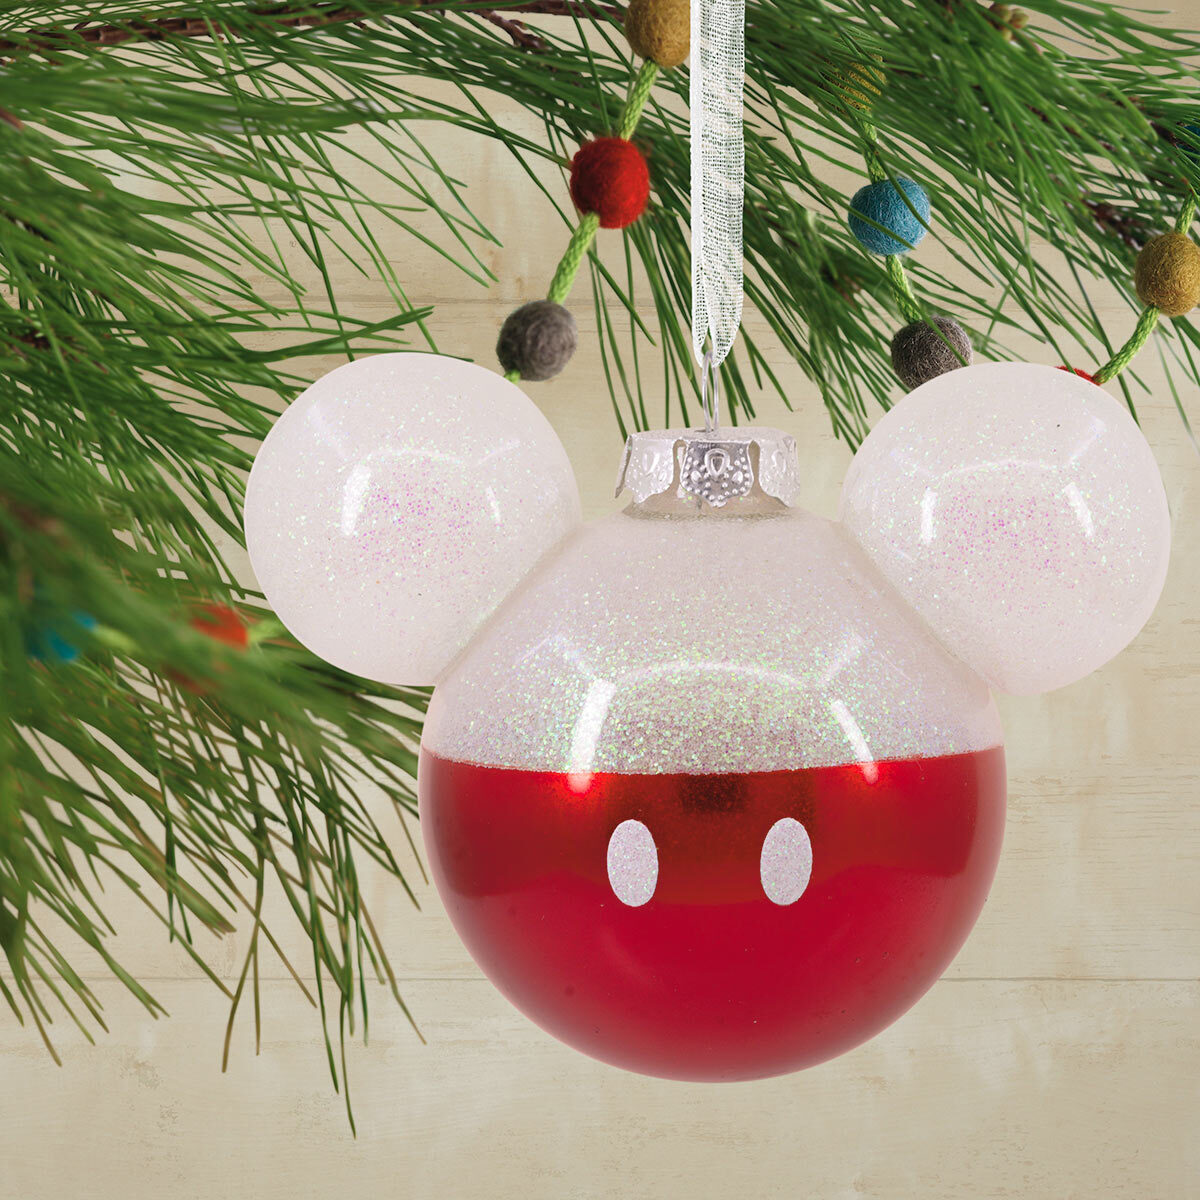 Buy Mickey Icon Ornaments Set of 4 Red Lifestyle Image at Costco.co.uk